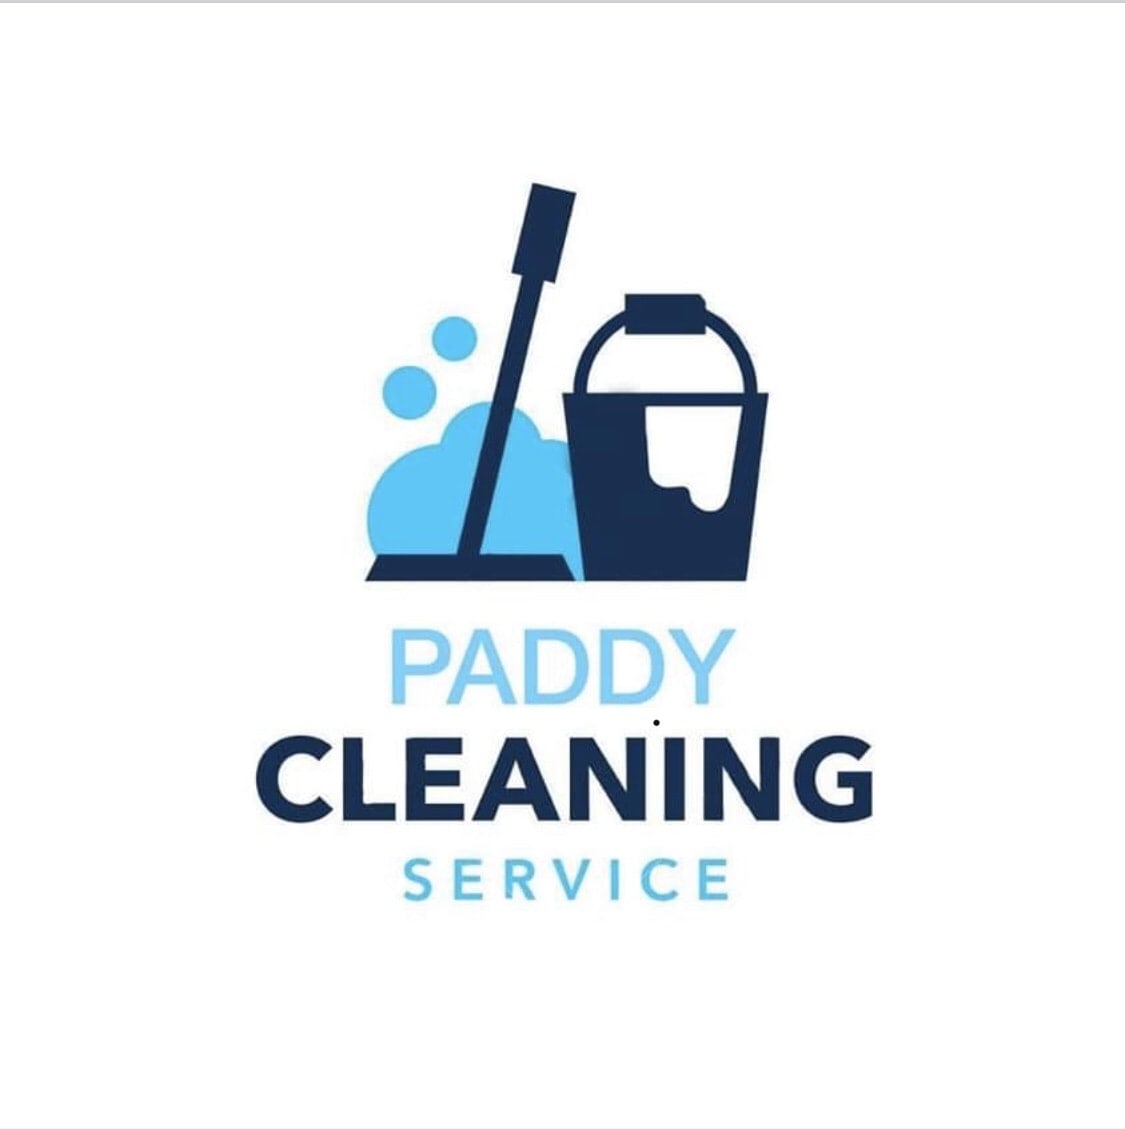 Paddy's Cleaning Service